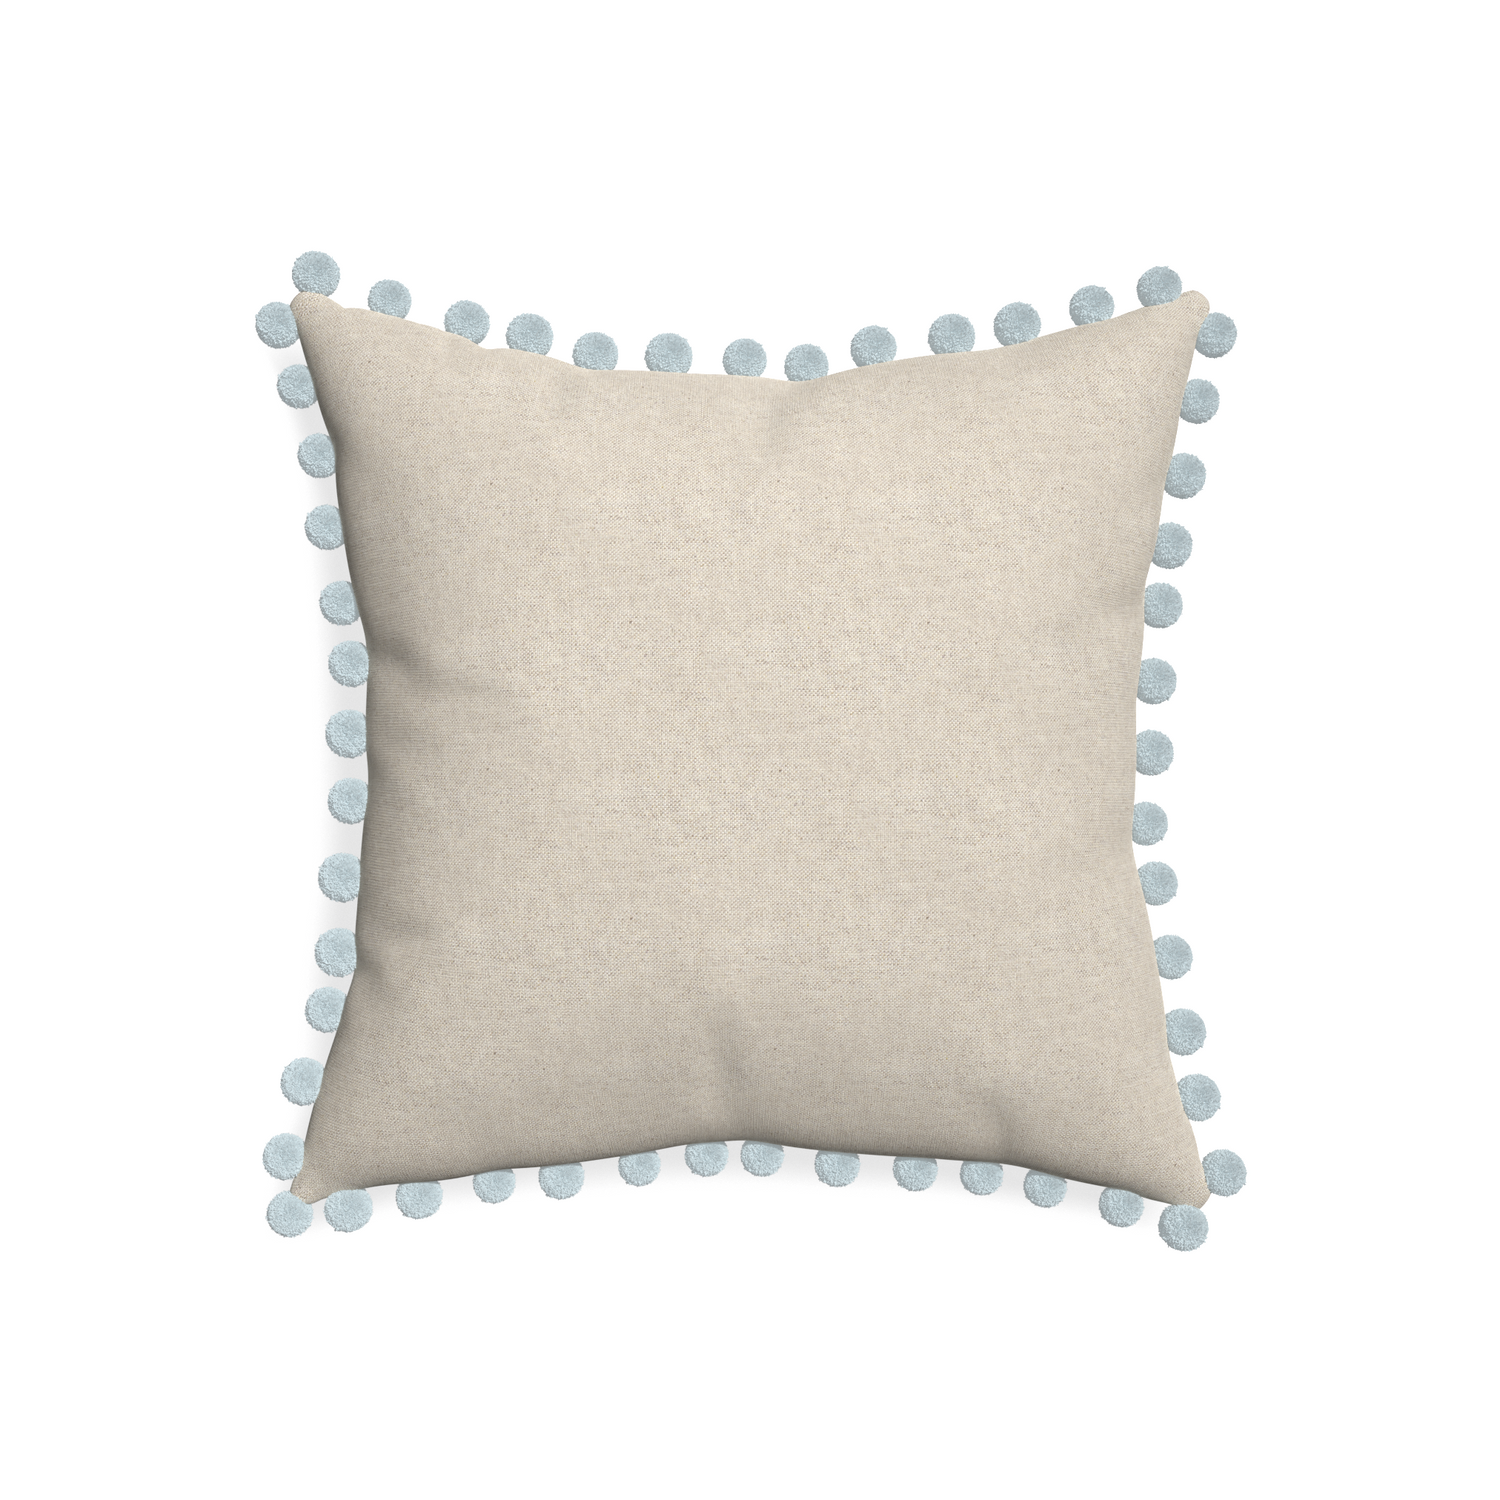 20-square oat custom light brownpillow with powder pom pom on white background